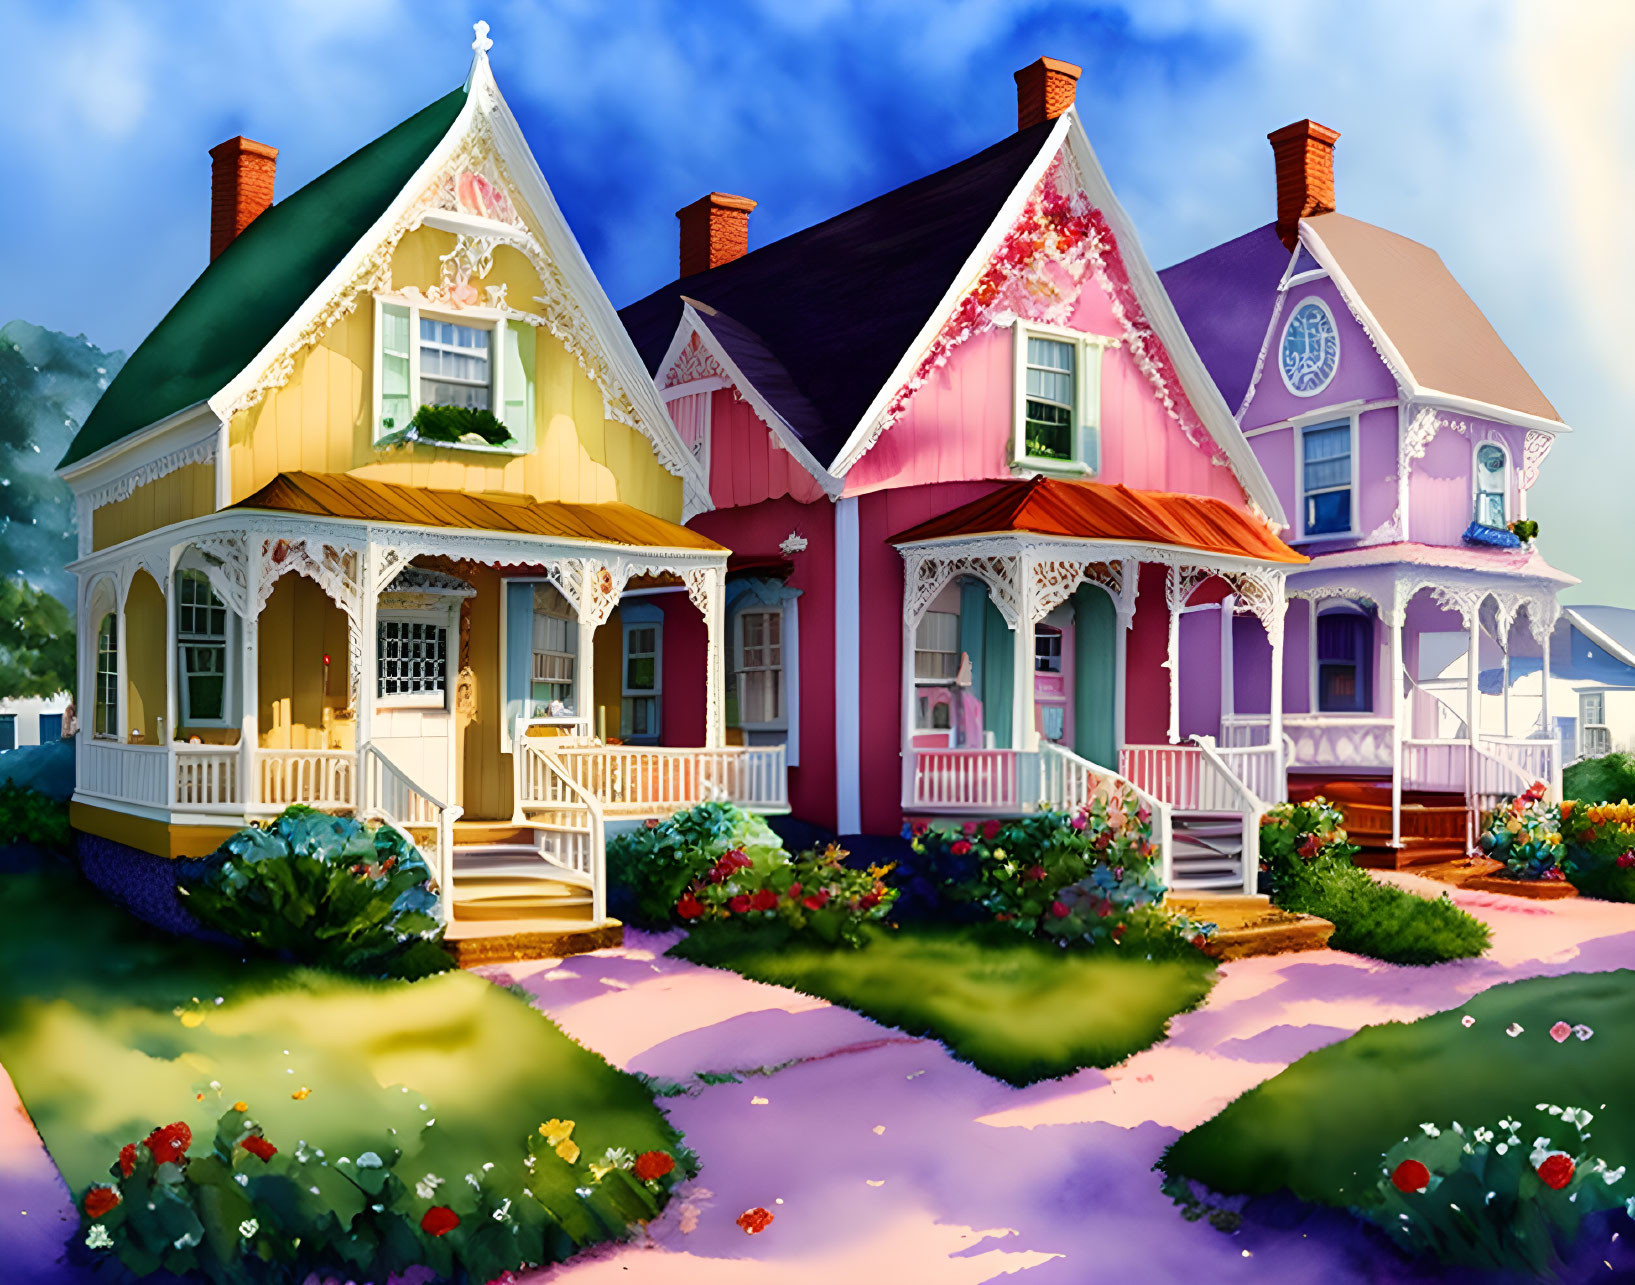 Gingerbread Houses in Cape May, New Jersey